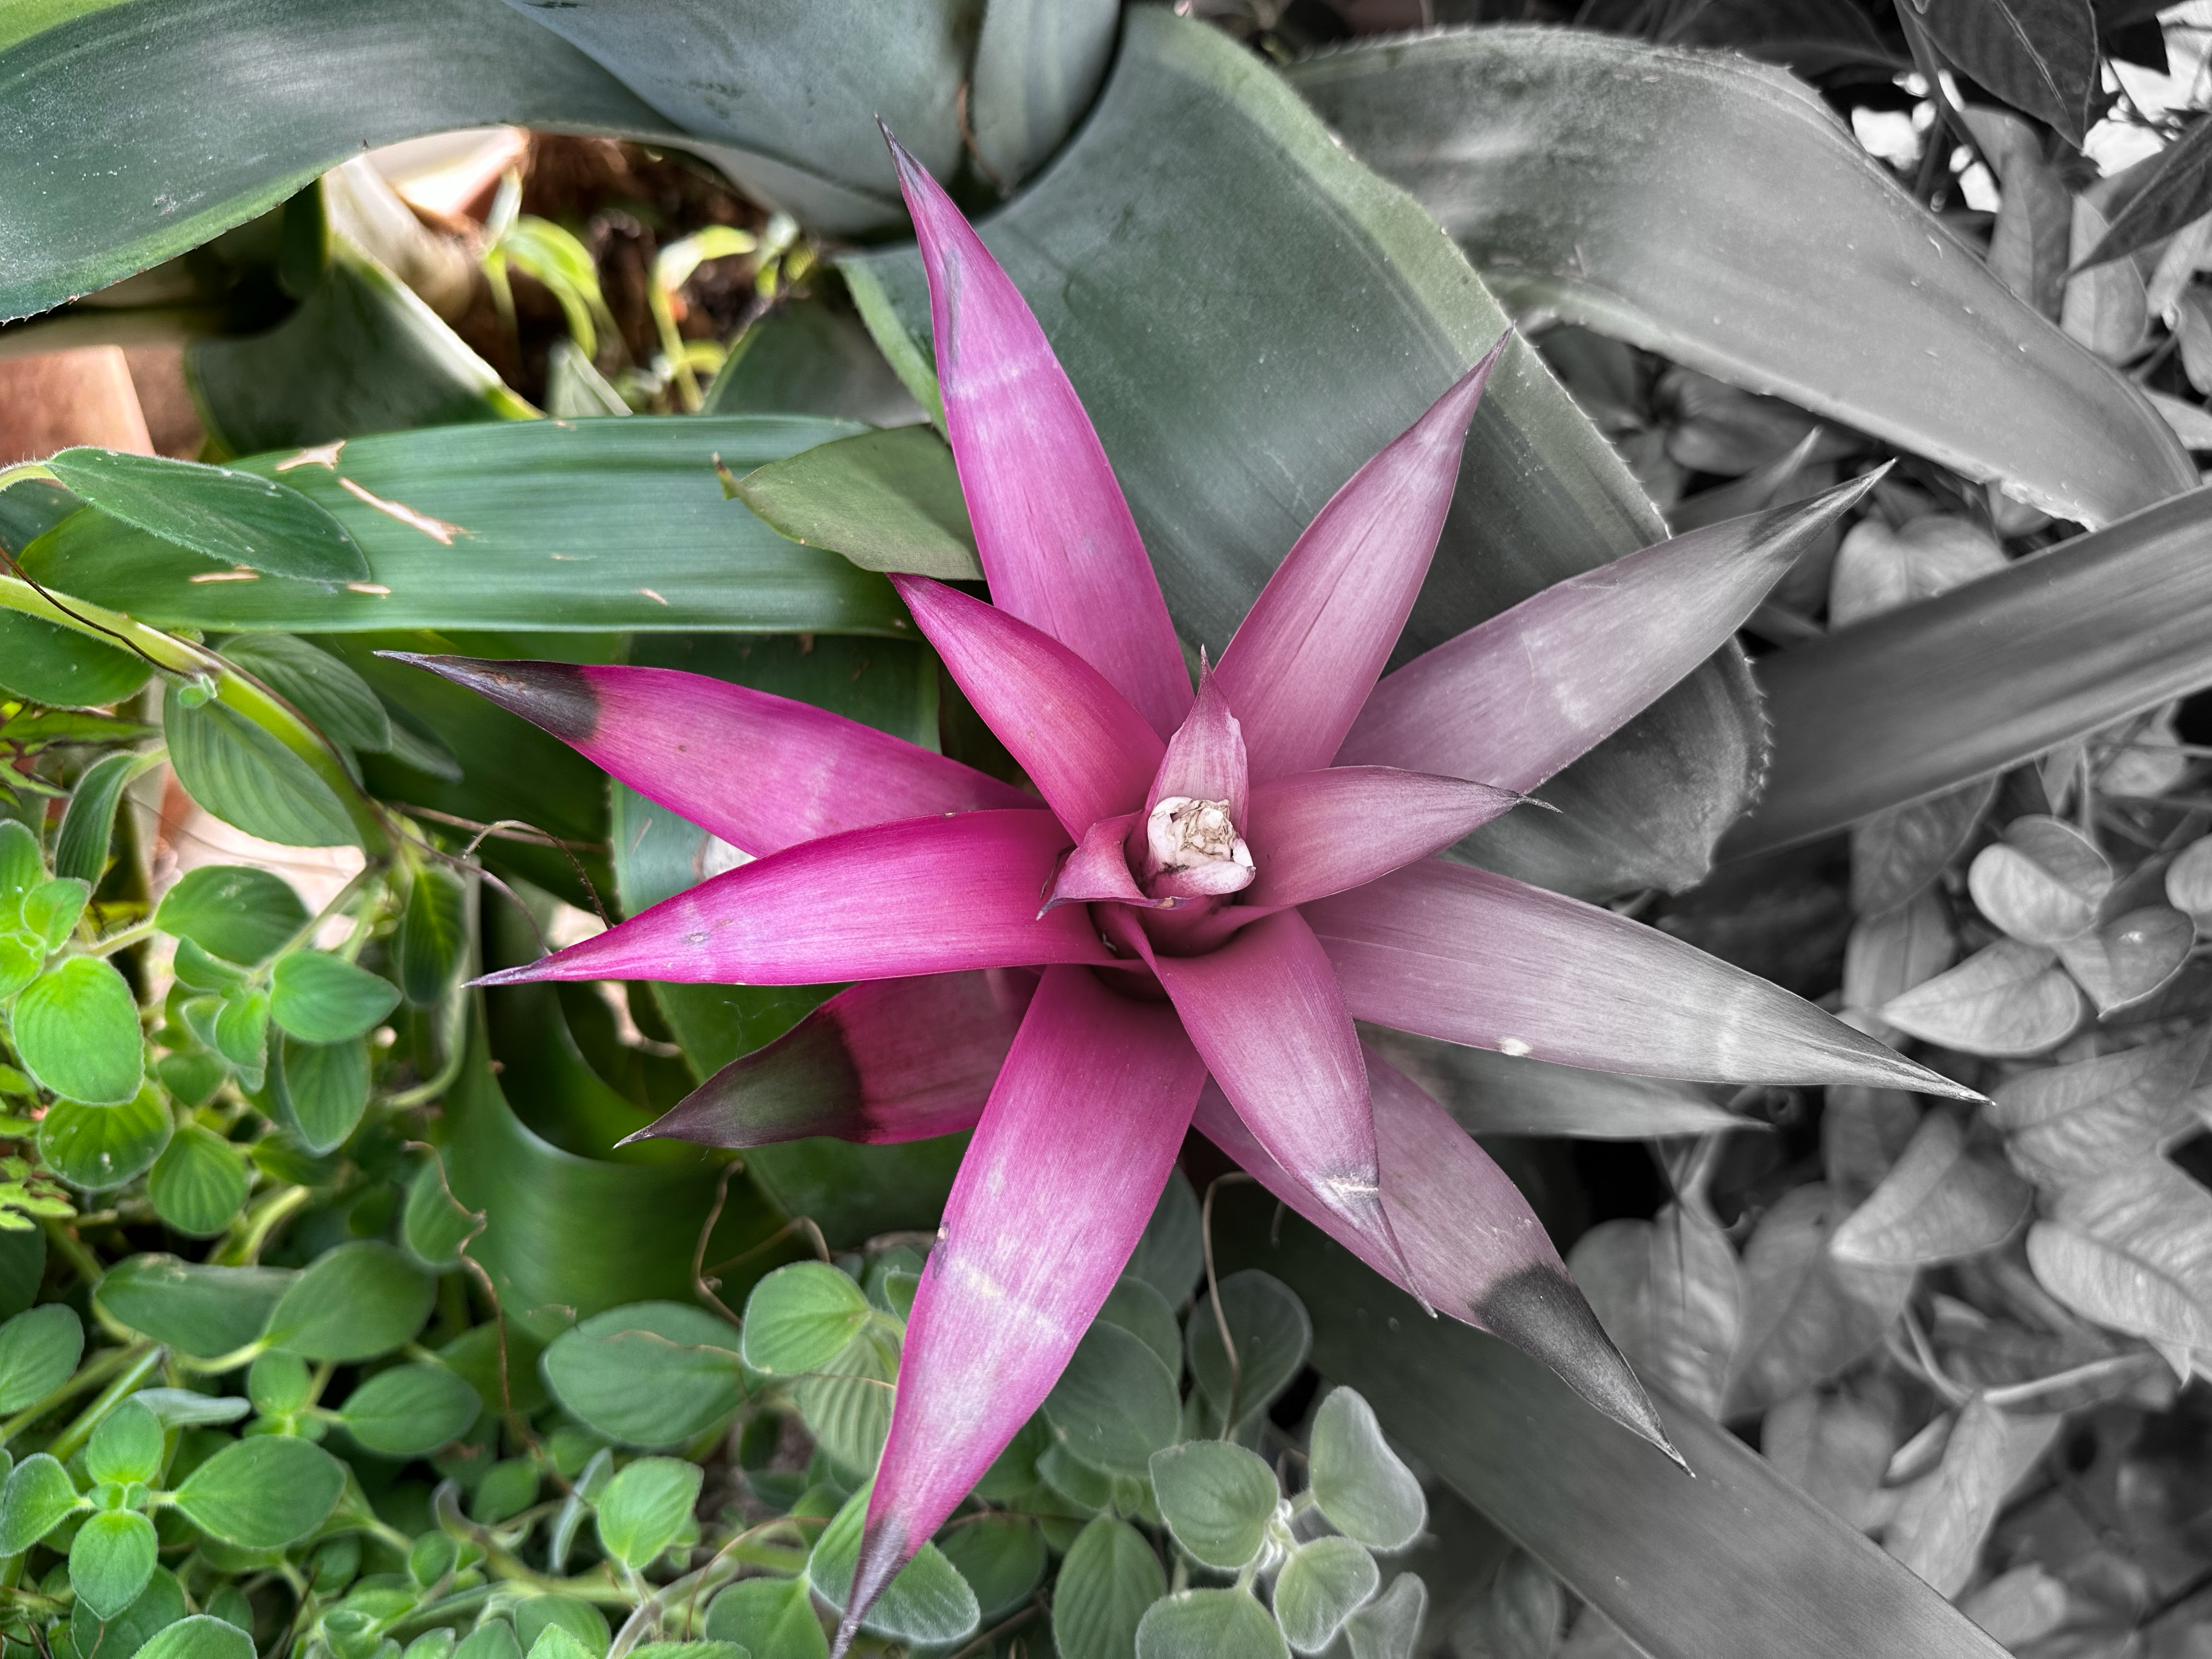 A picture of a flower doctored so that the leaves and blossom are brilliant green and purple on the left, but fade into shades of grey on the right.